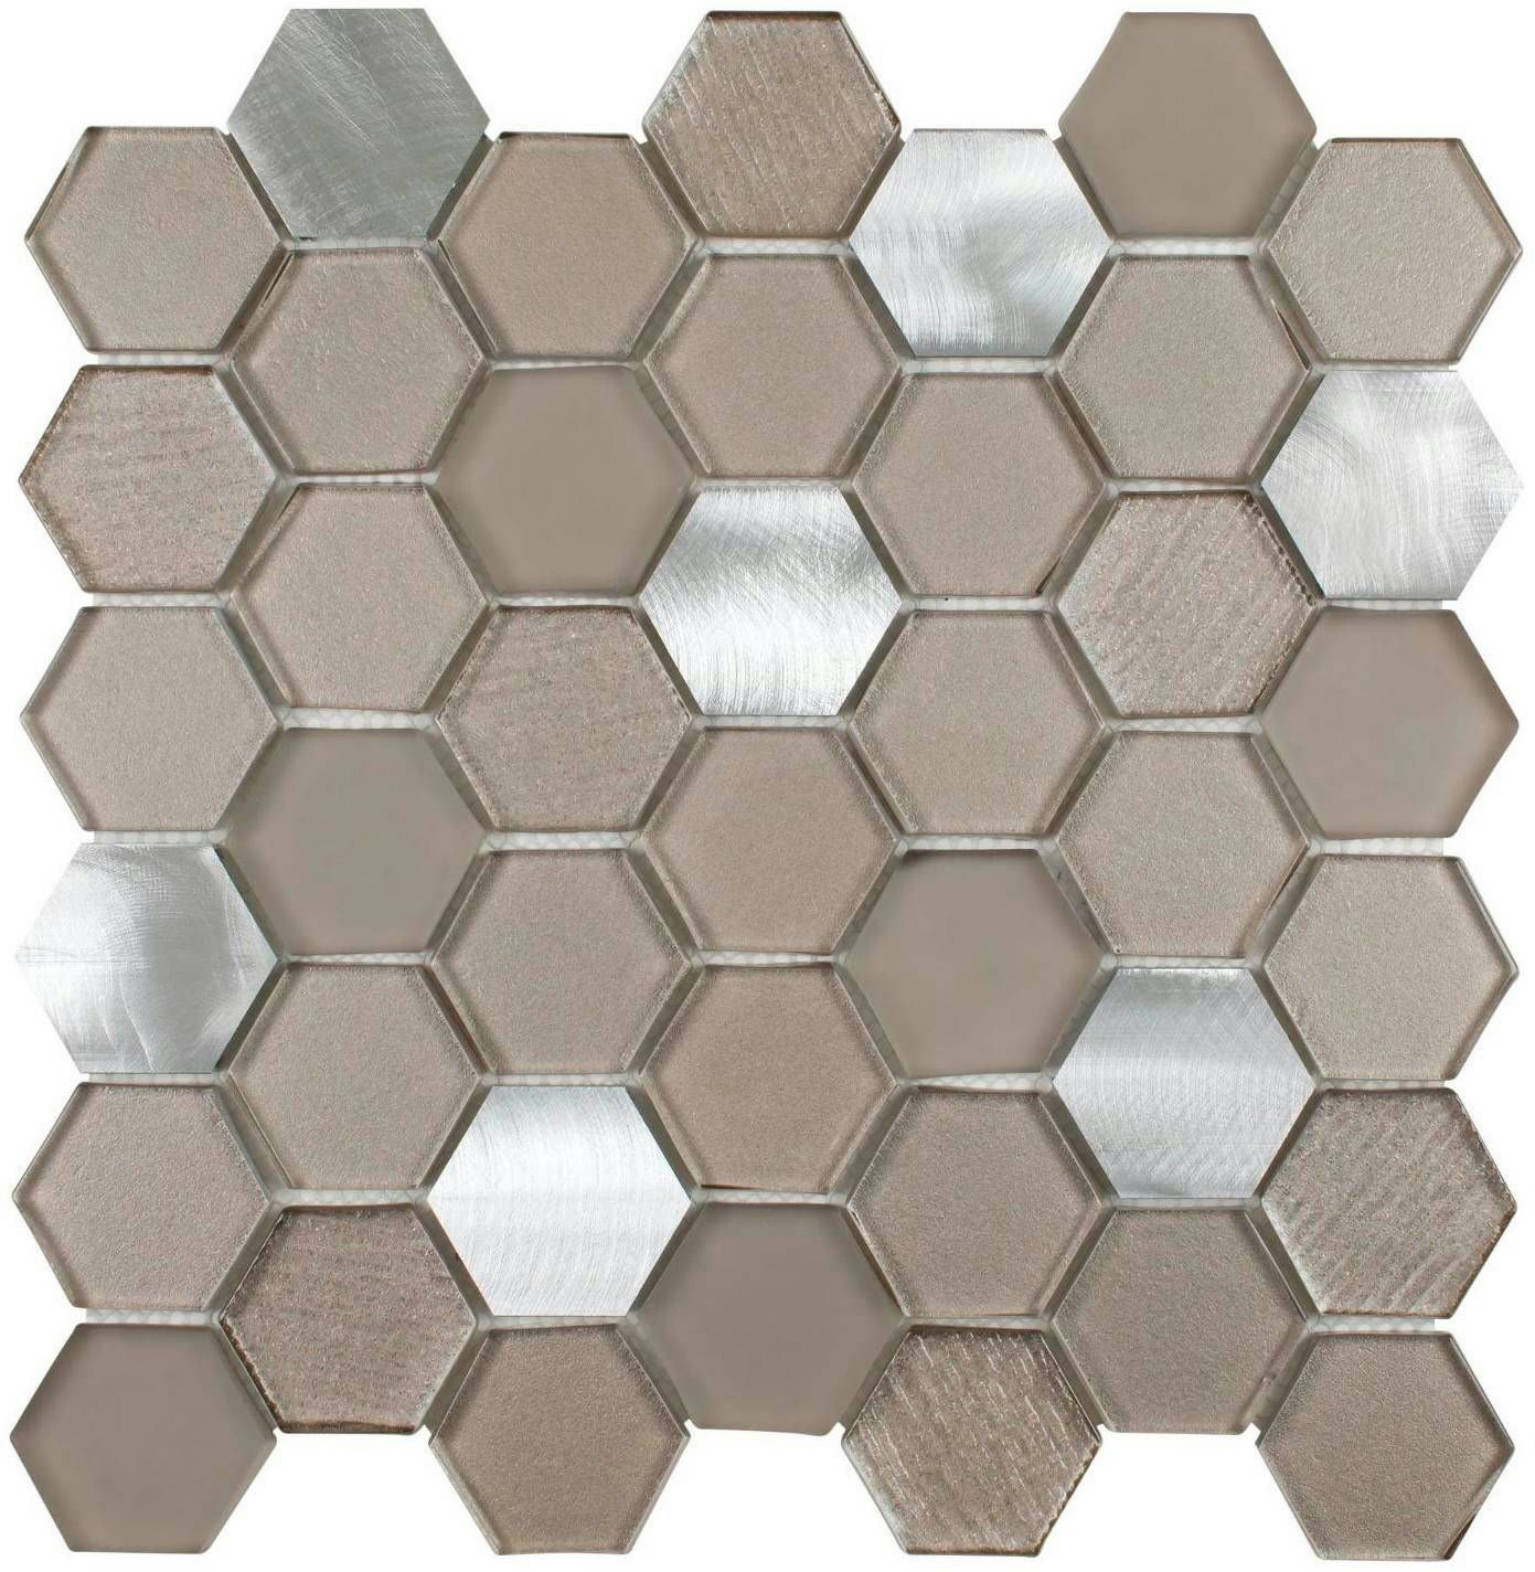 HX-237 | Stones & More | Finest selection of Mosaics, Glass, Tile and Stone